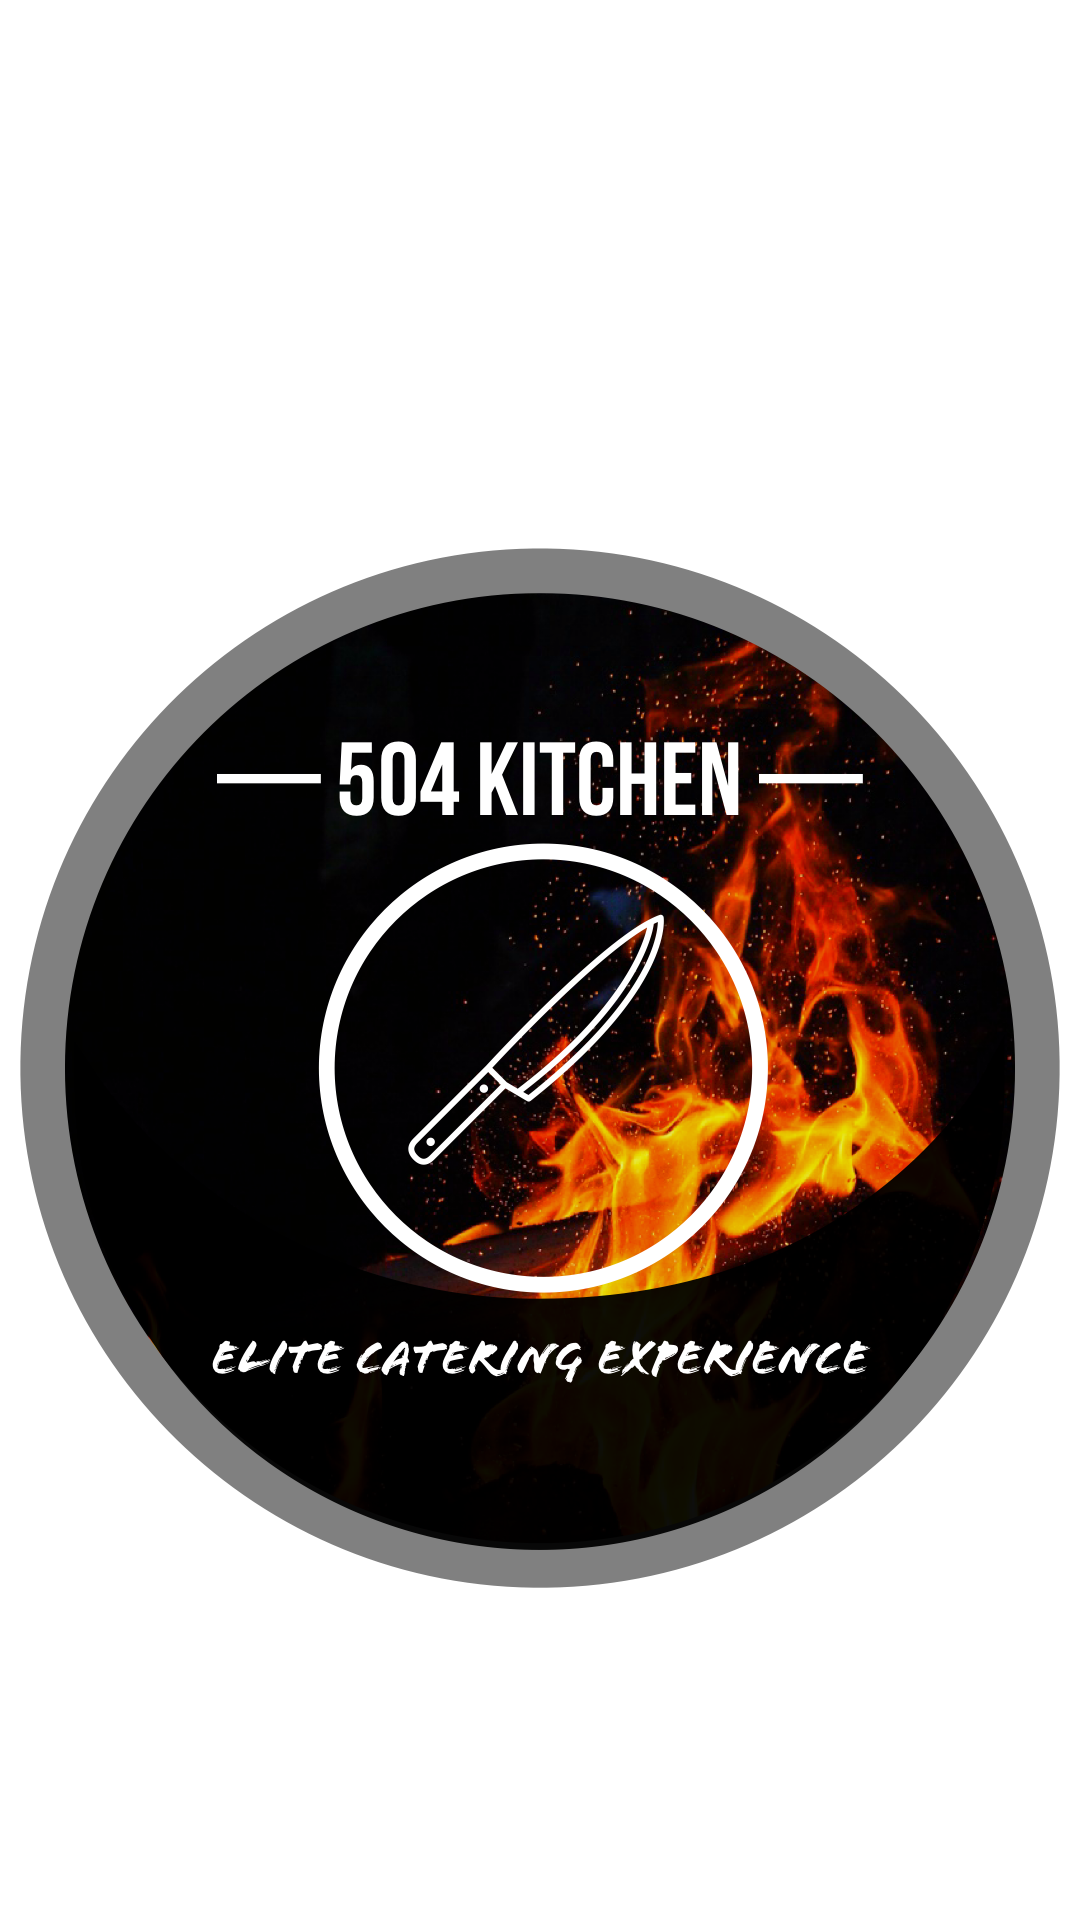 504 Kitchen Elite Catering Experience